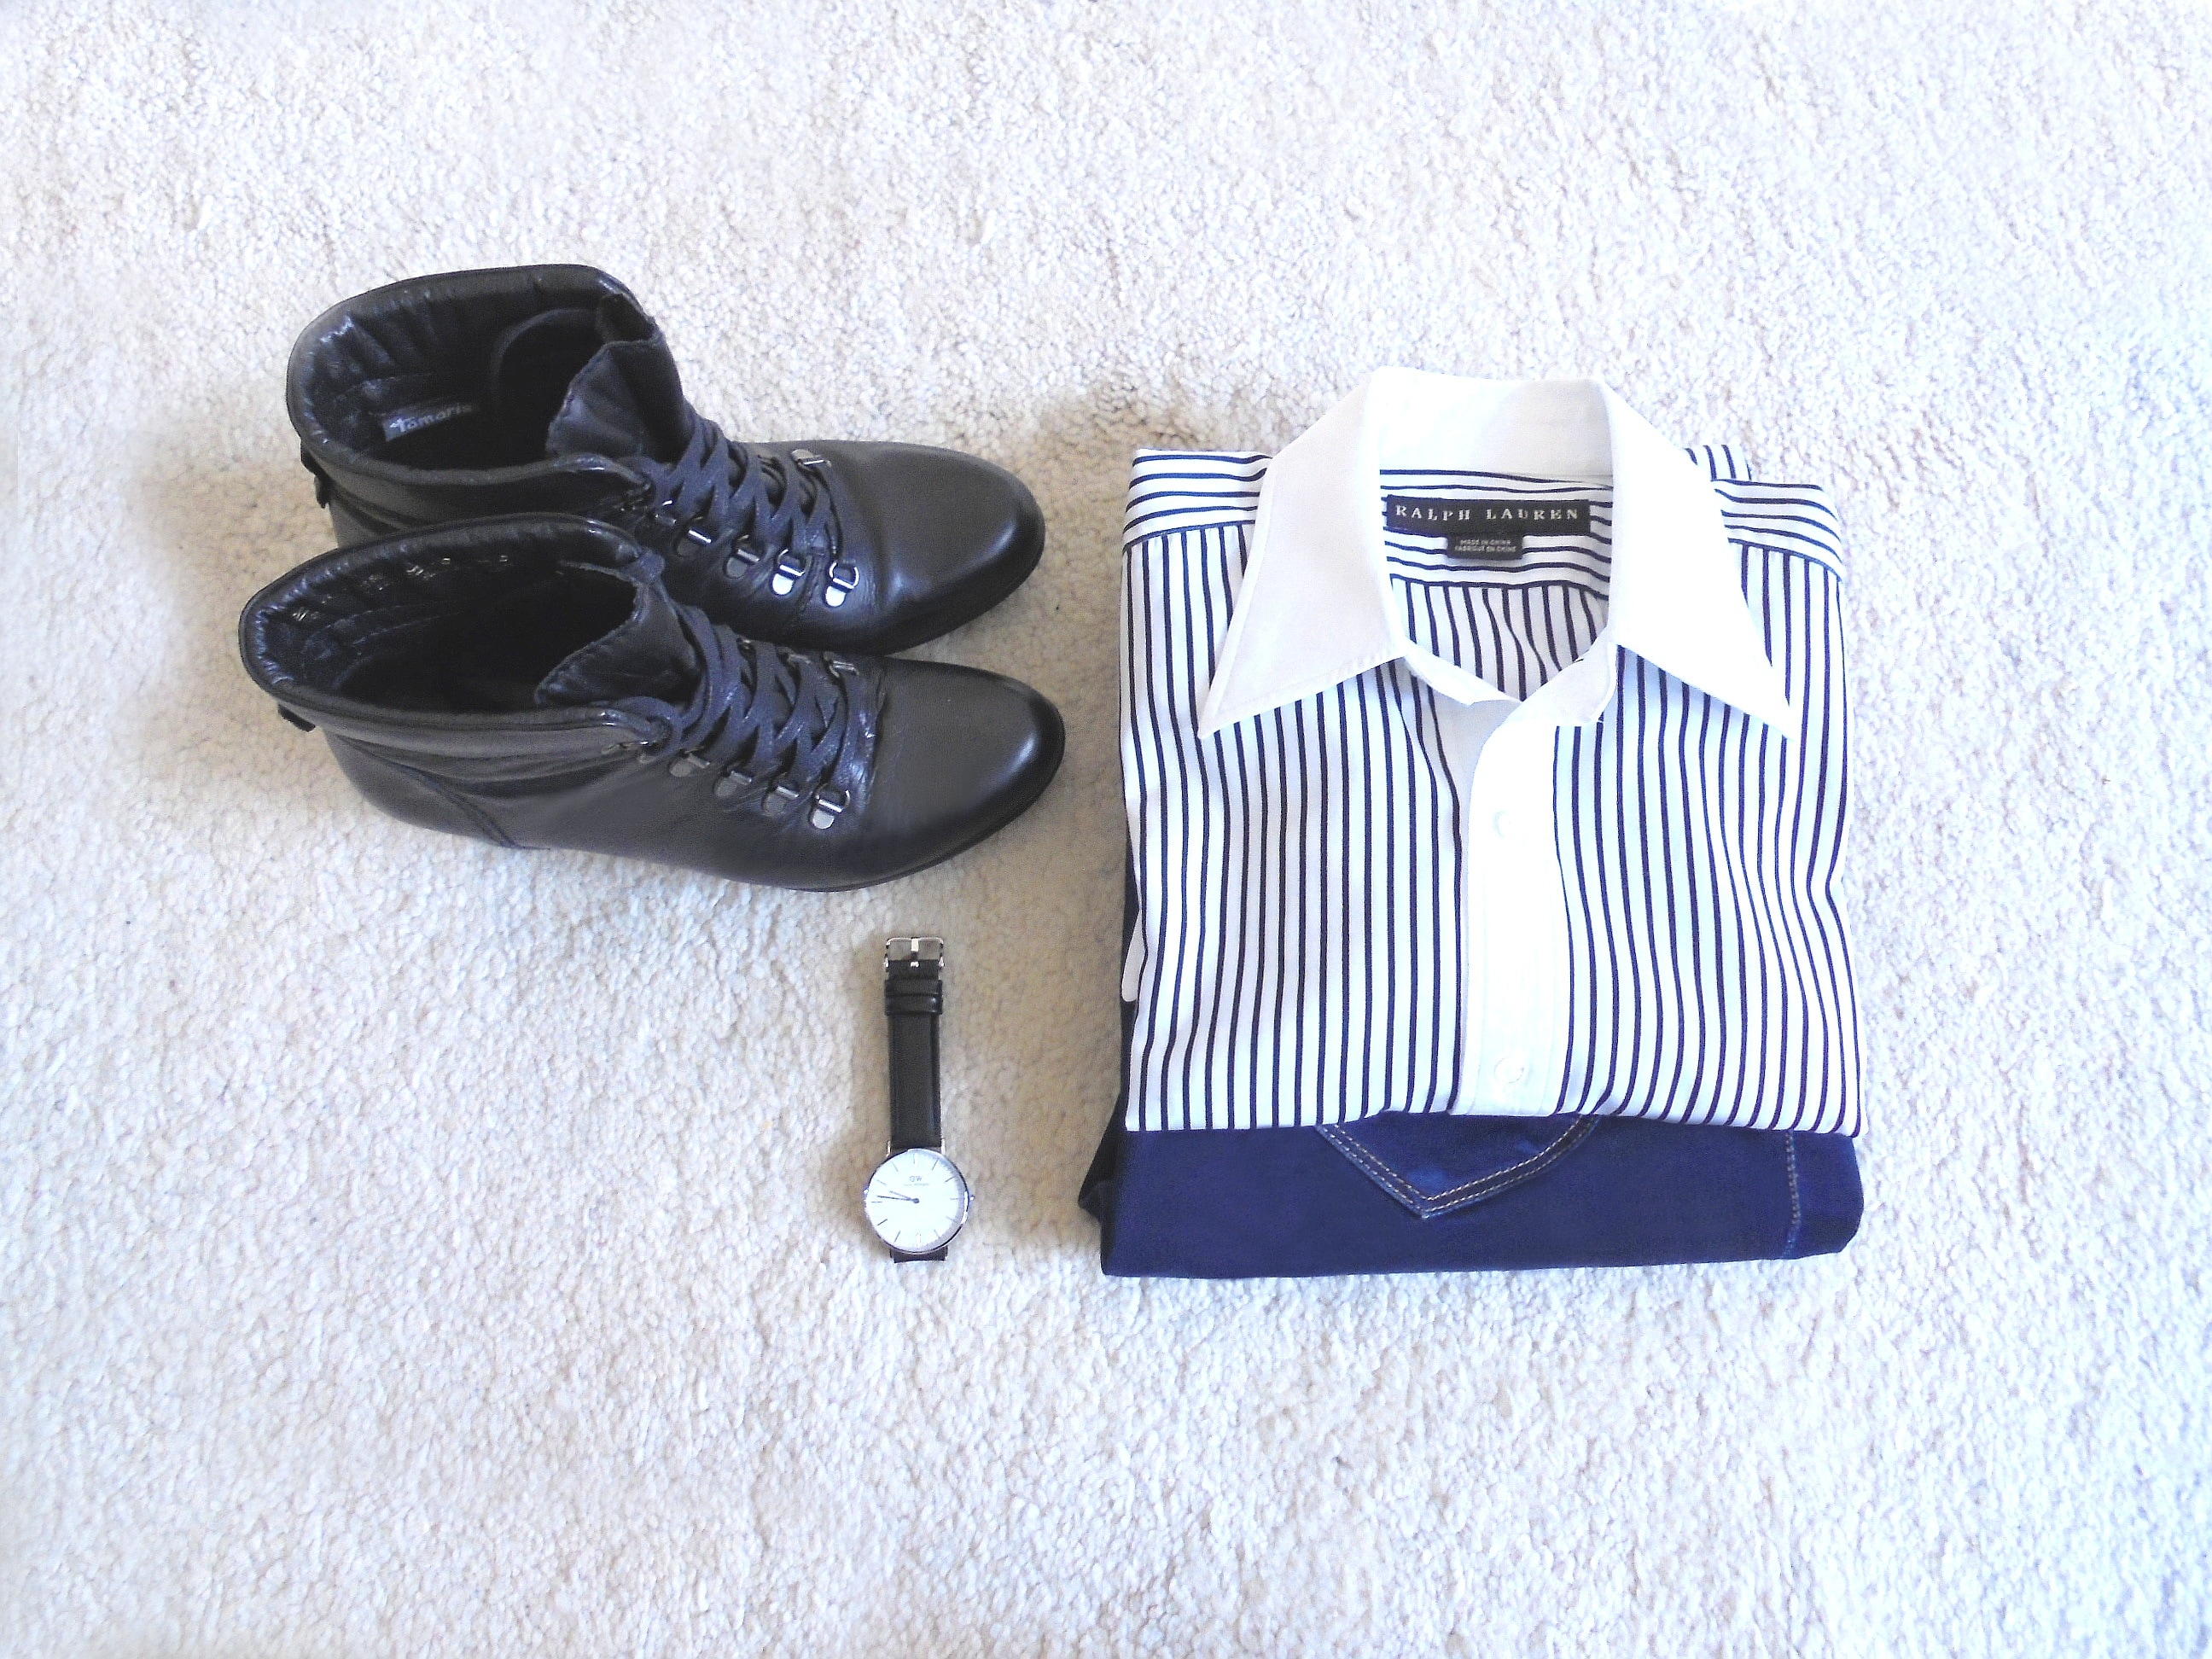 black and white pinstripe dress shirt, analog watch and black patent leather boots